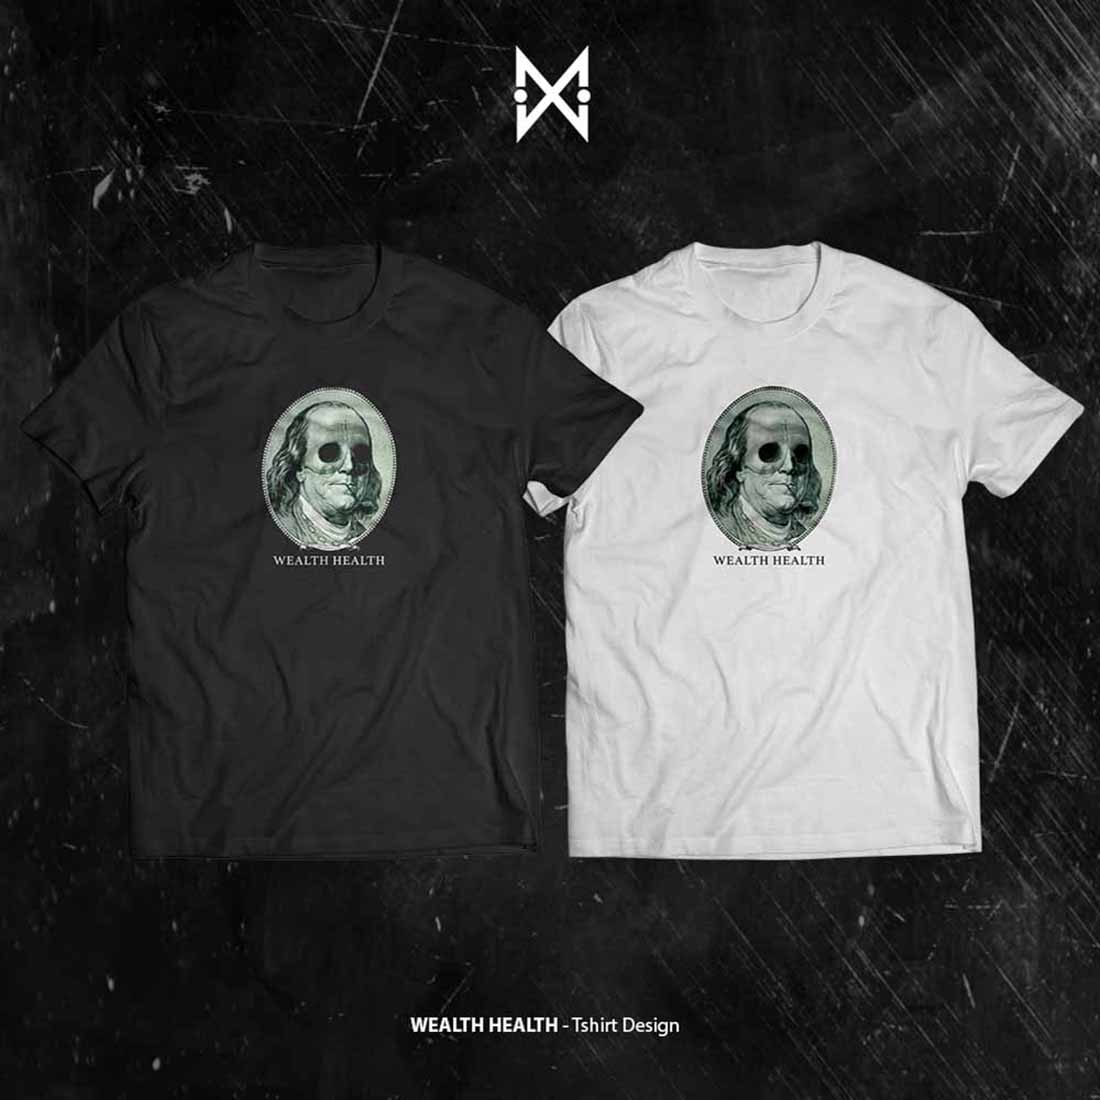 A set of images of t-shirts with adorable prints of Benjamin Franklin with gouged out eyes.